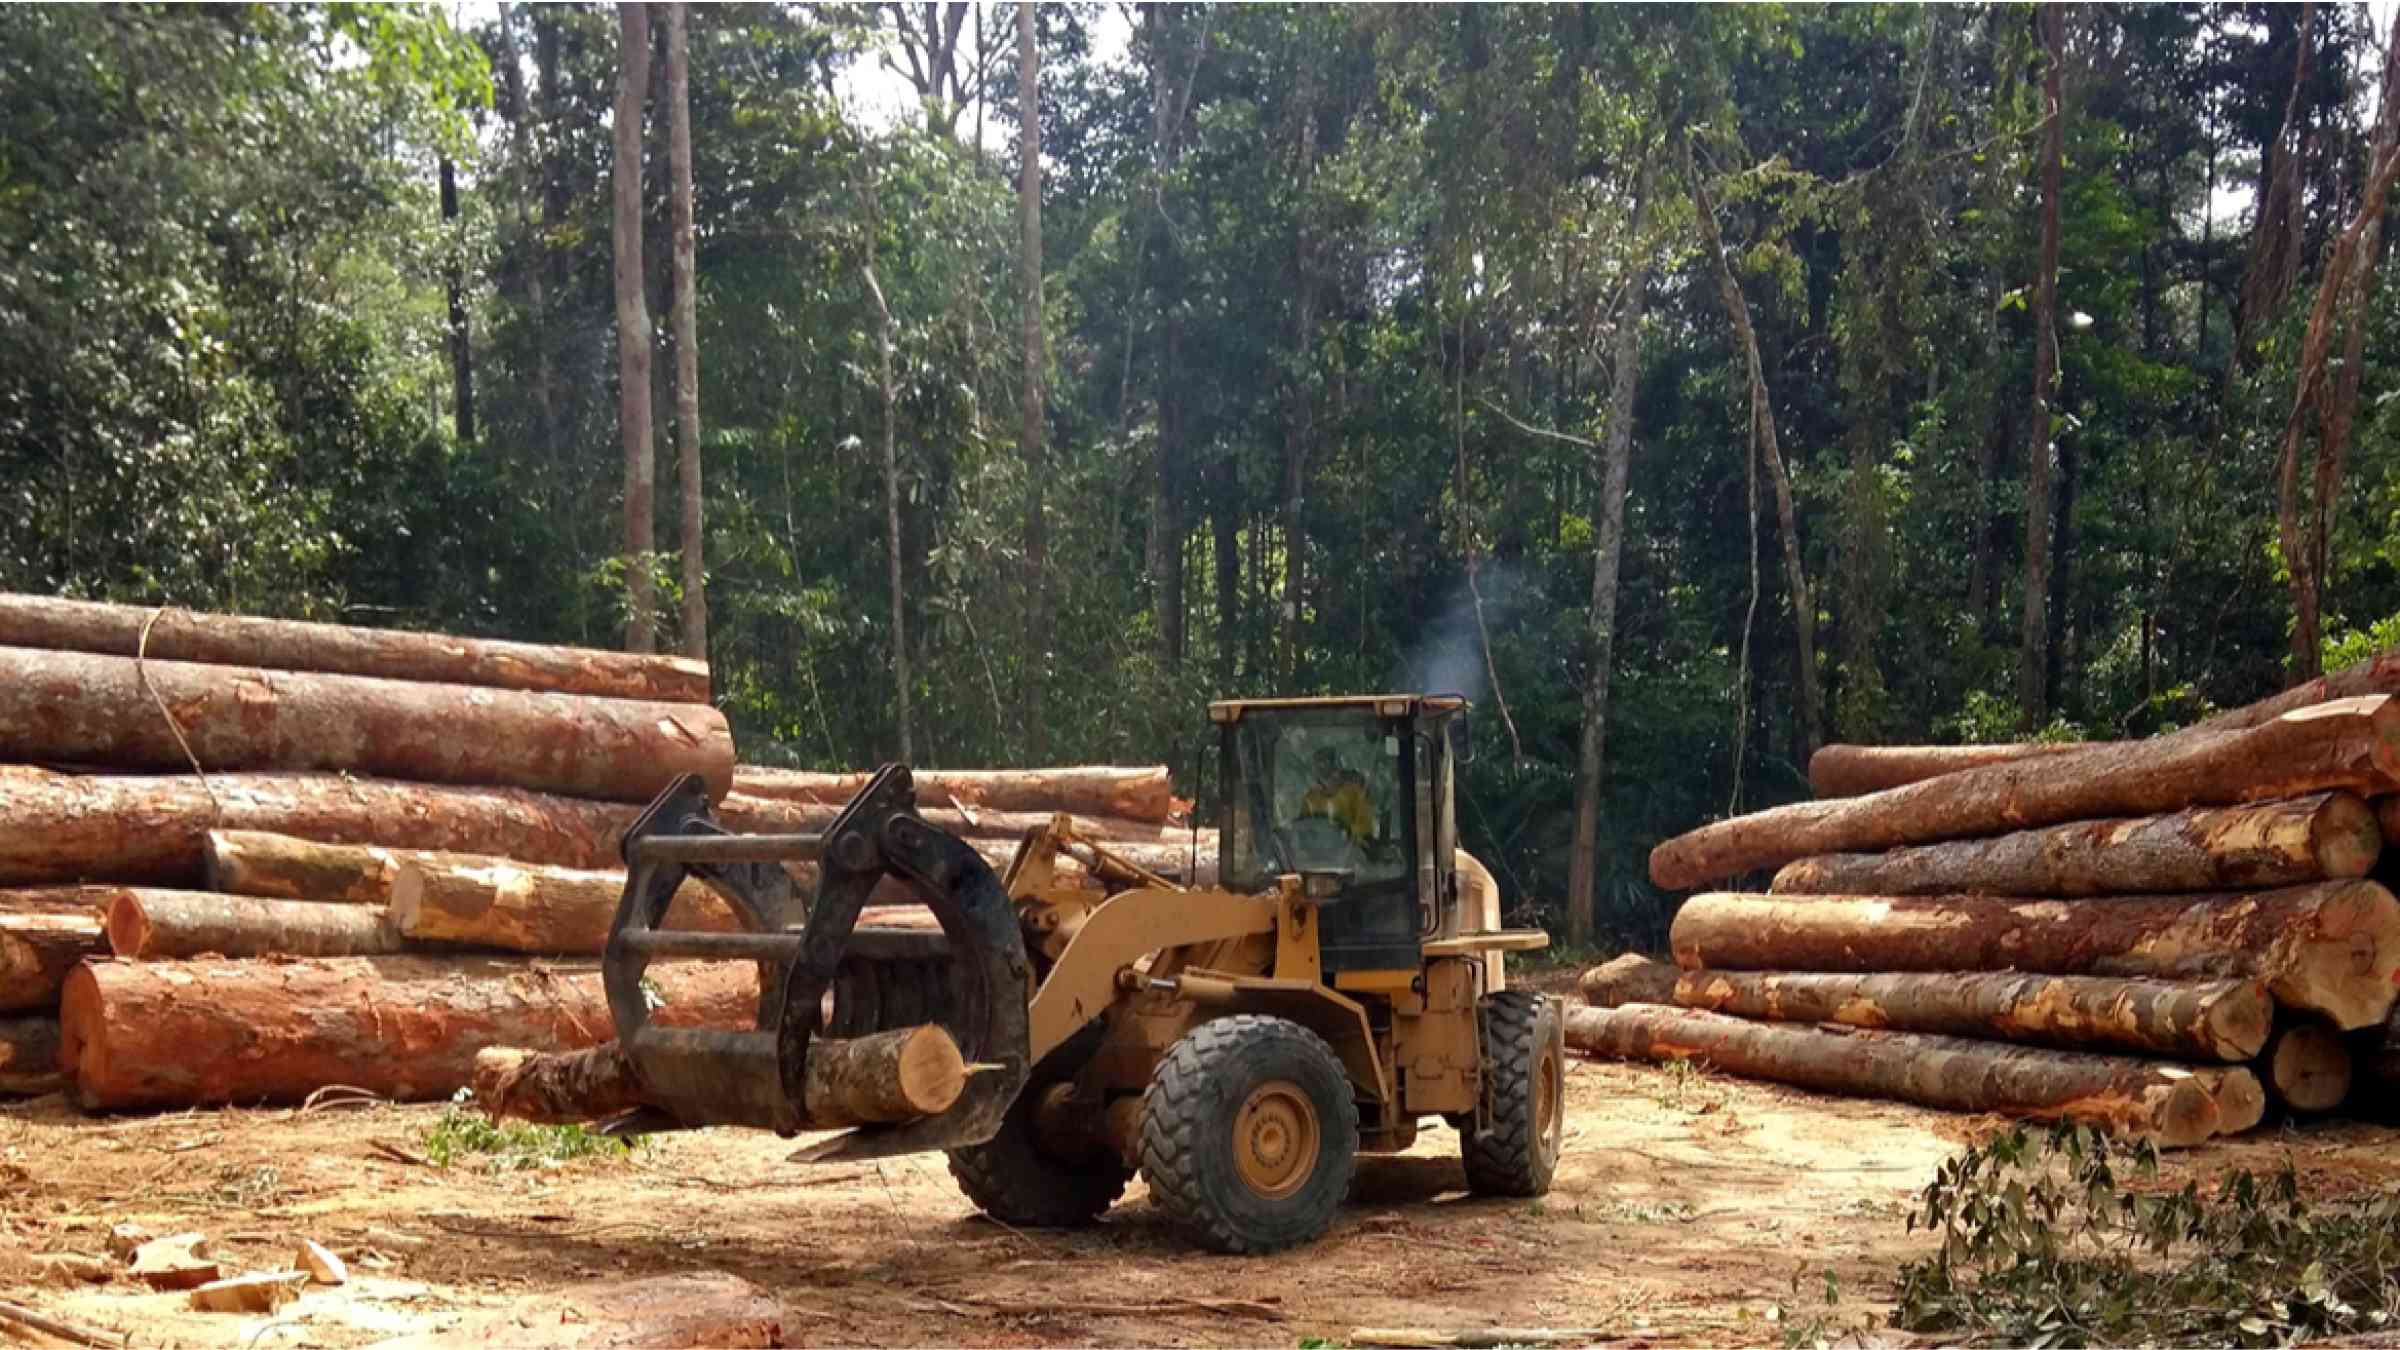 Wheel loader picking up the piles of wood from the Amazon forest region in Brazil